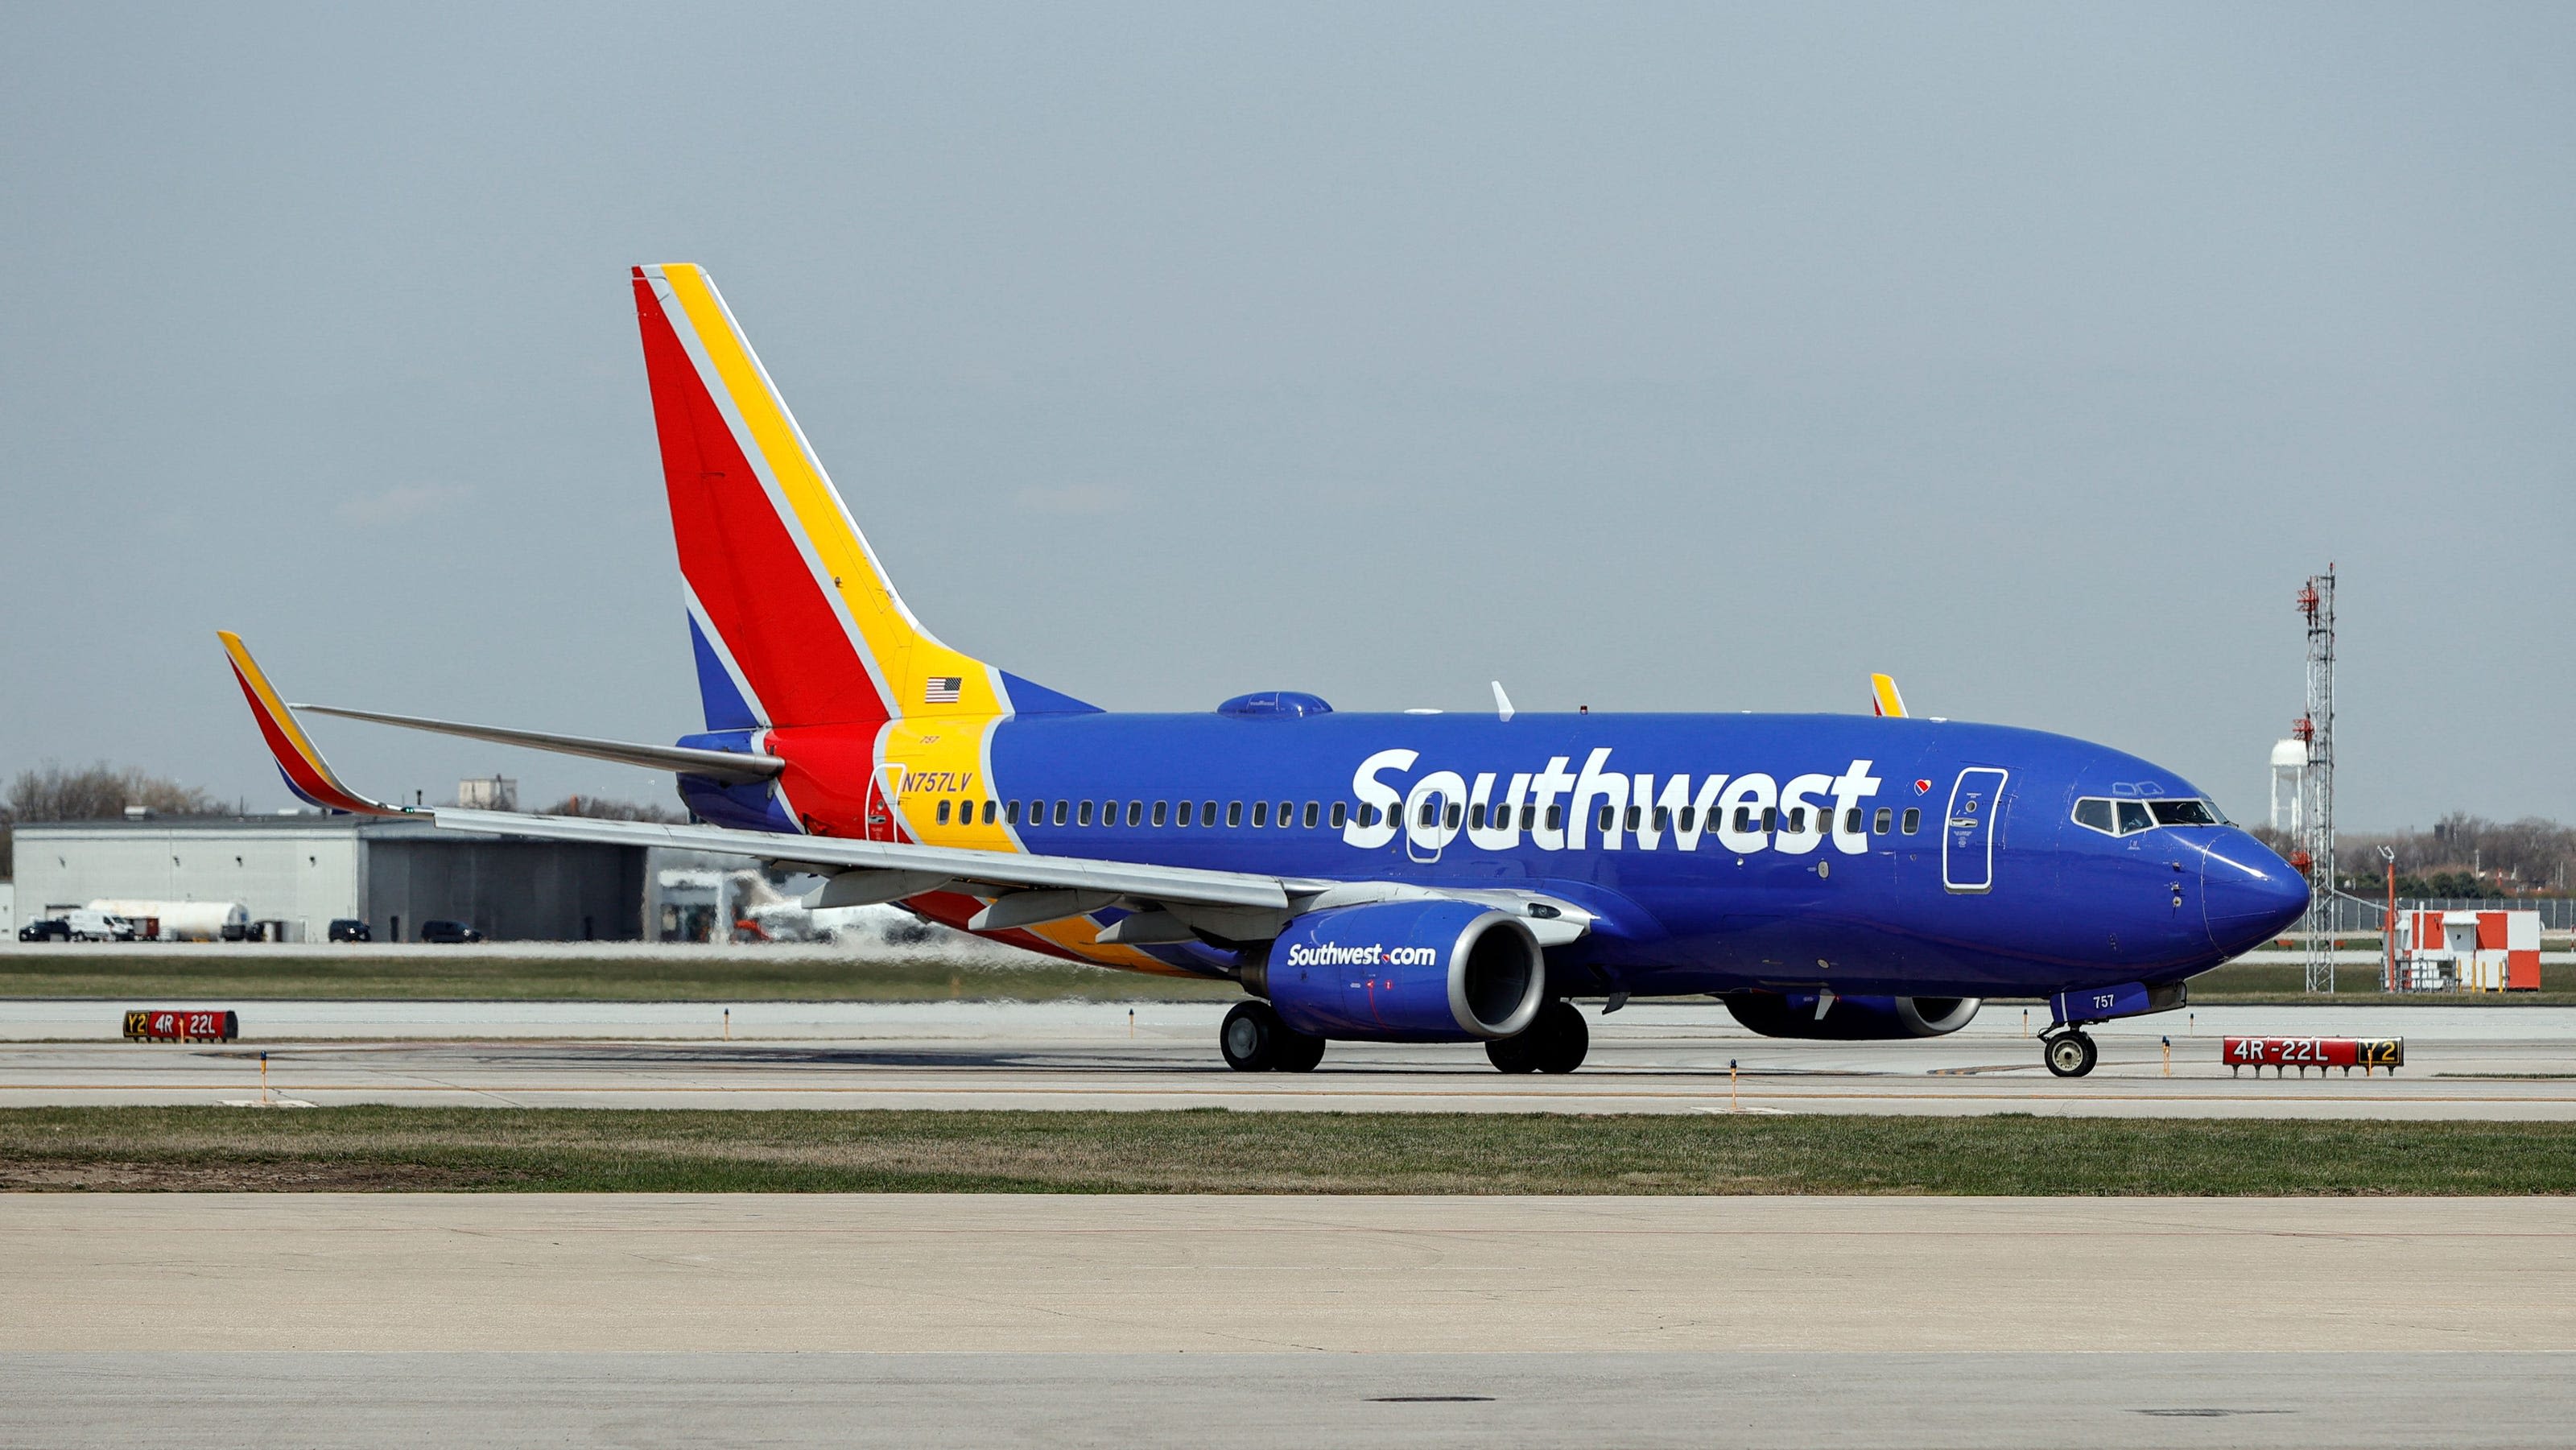 Southwest Airlines flights face numerous delays from 'brief' power outage